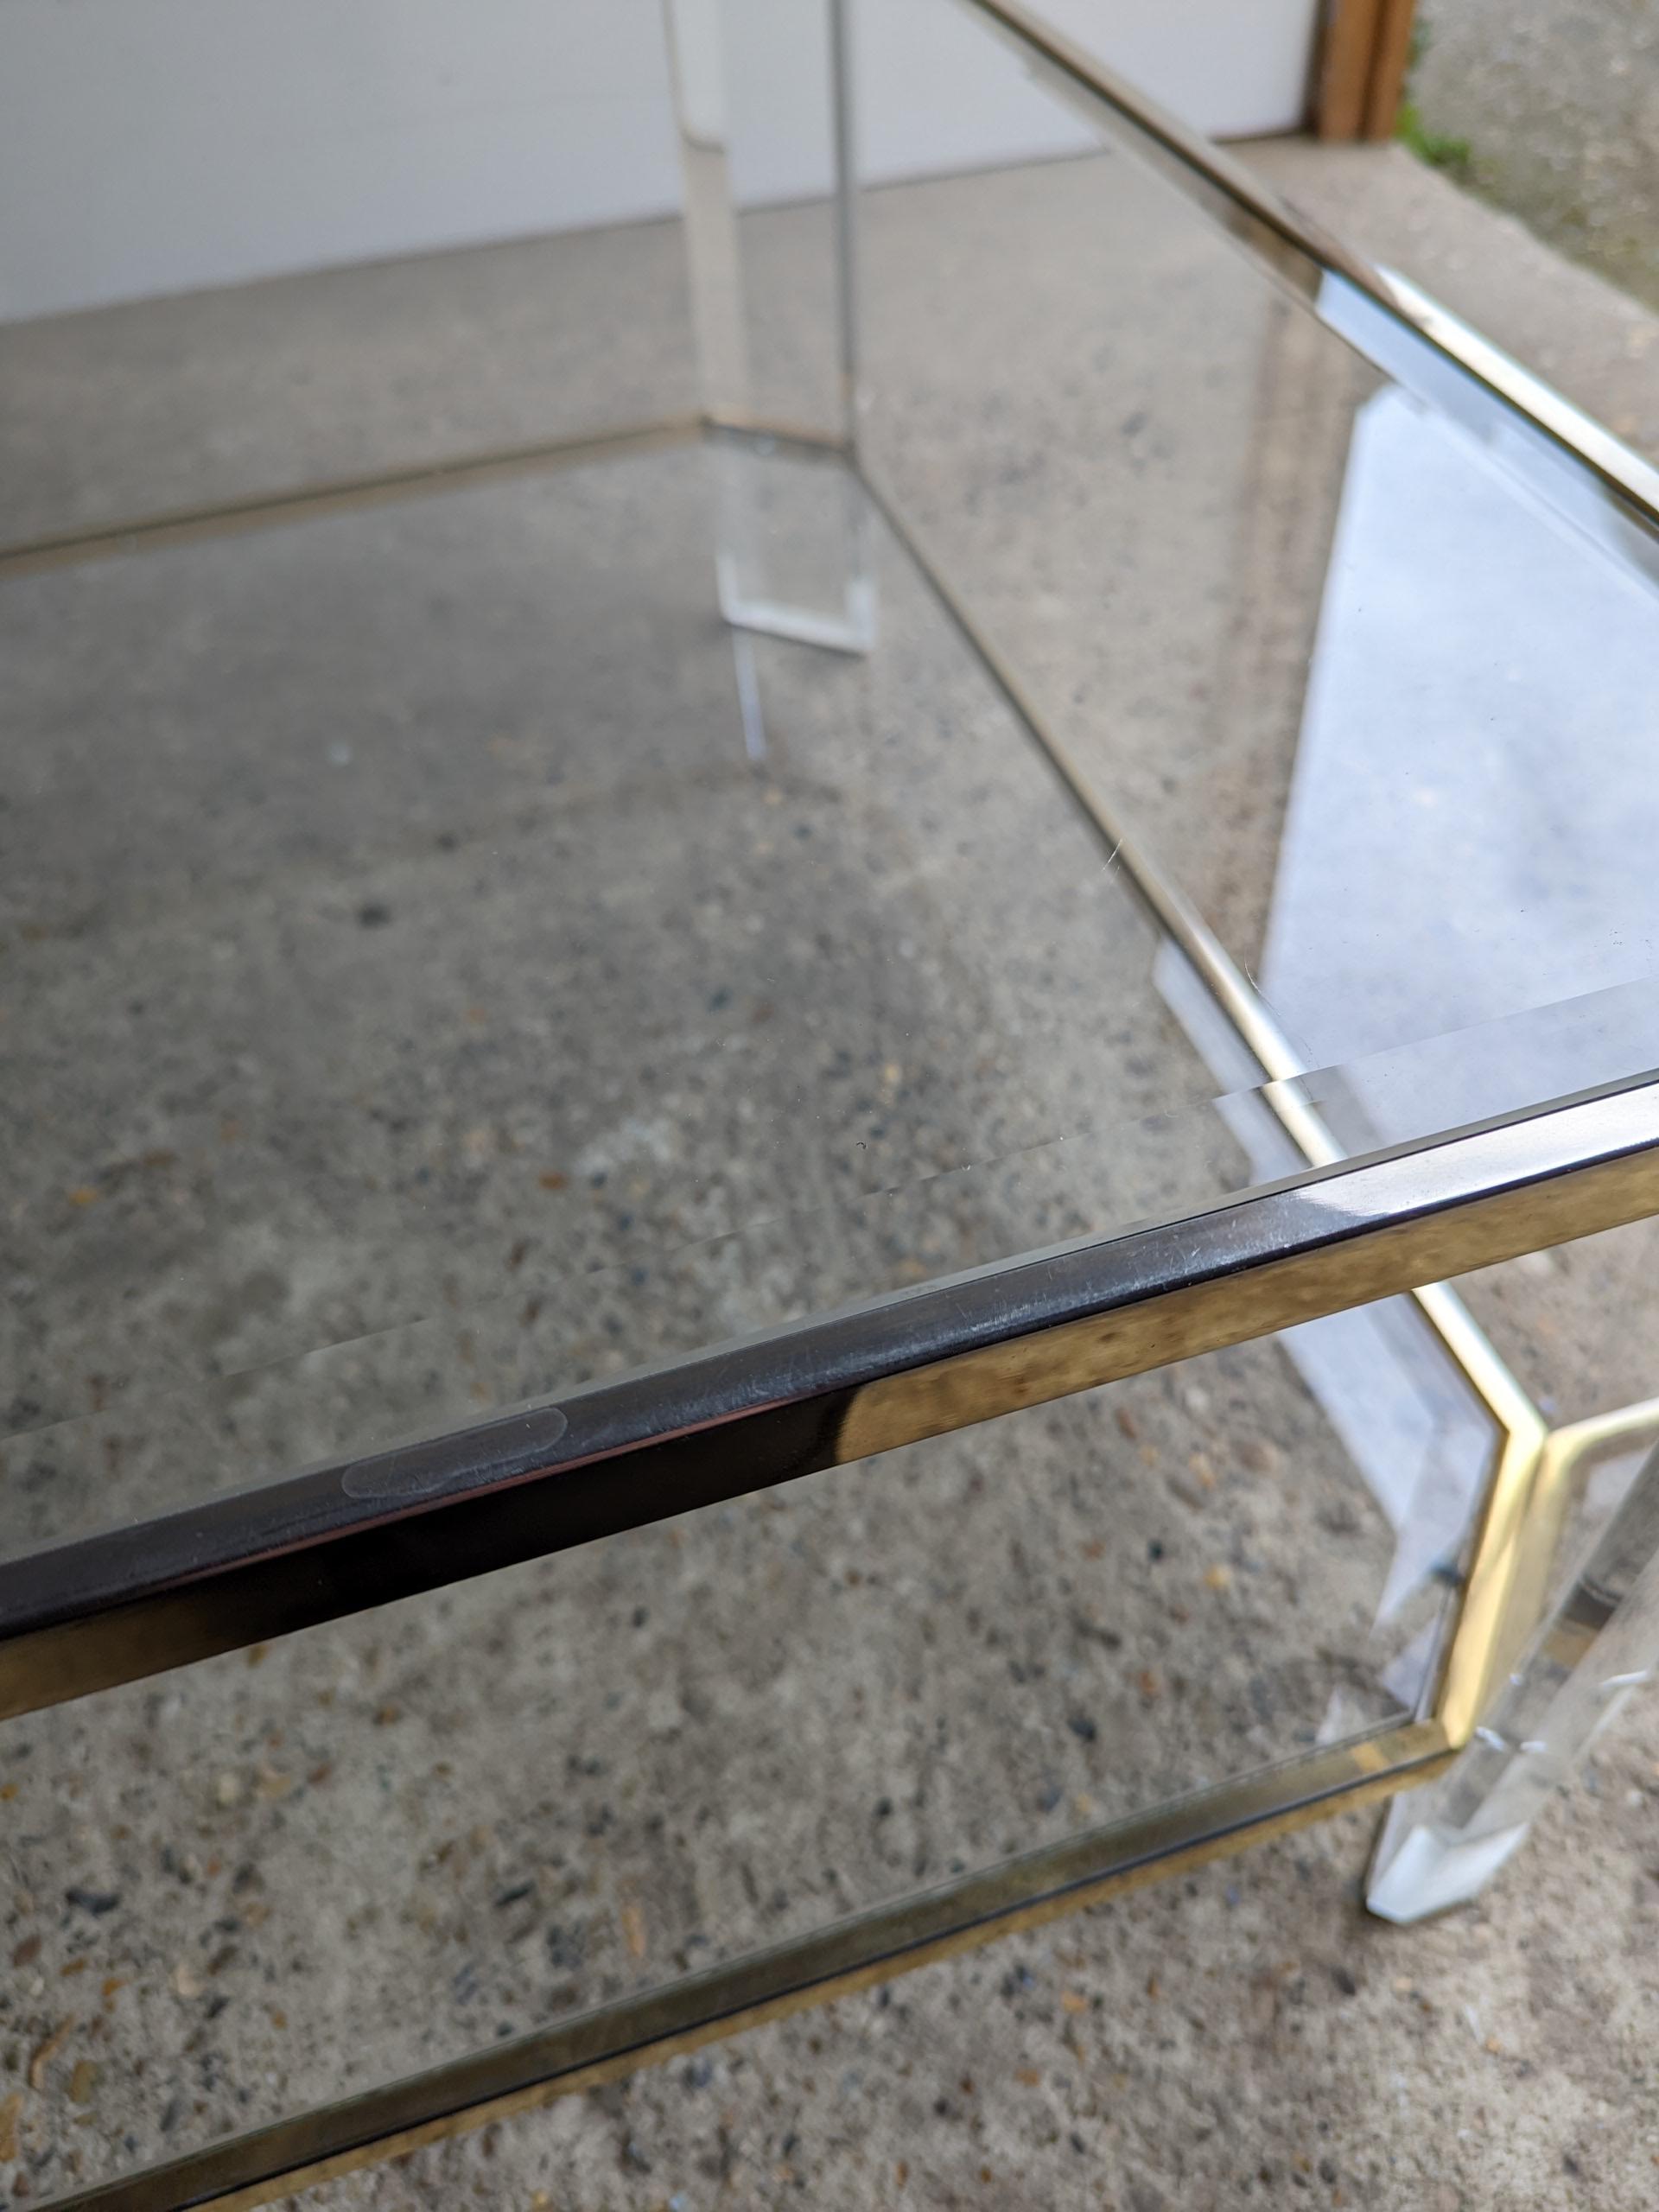 1970s French lucite coffee table featuring brass and glass shelving.